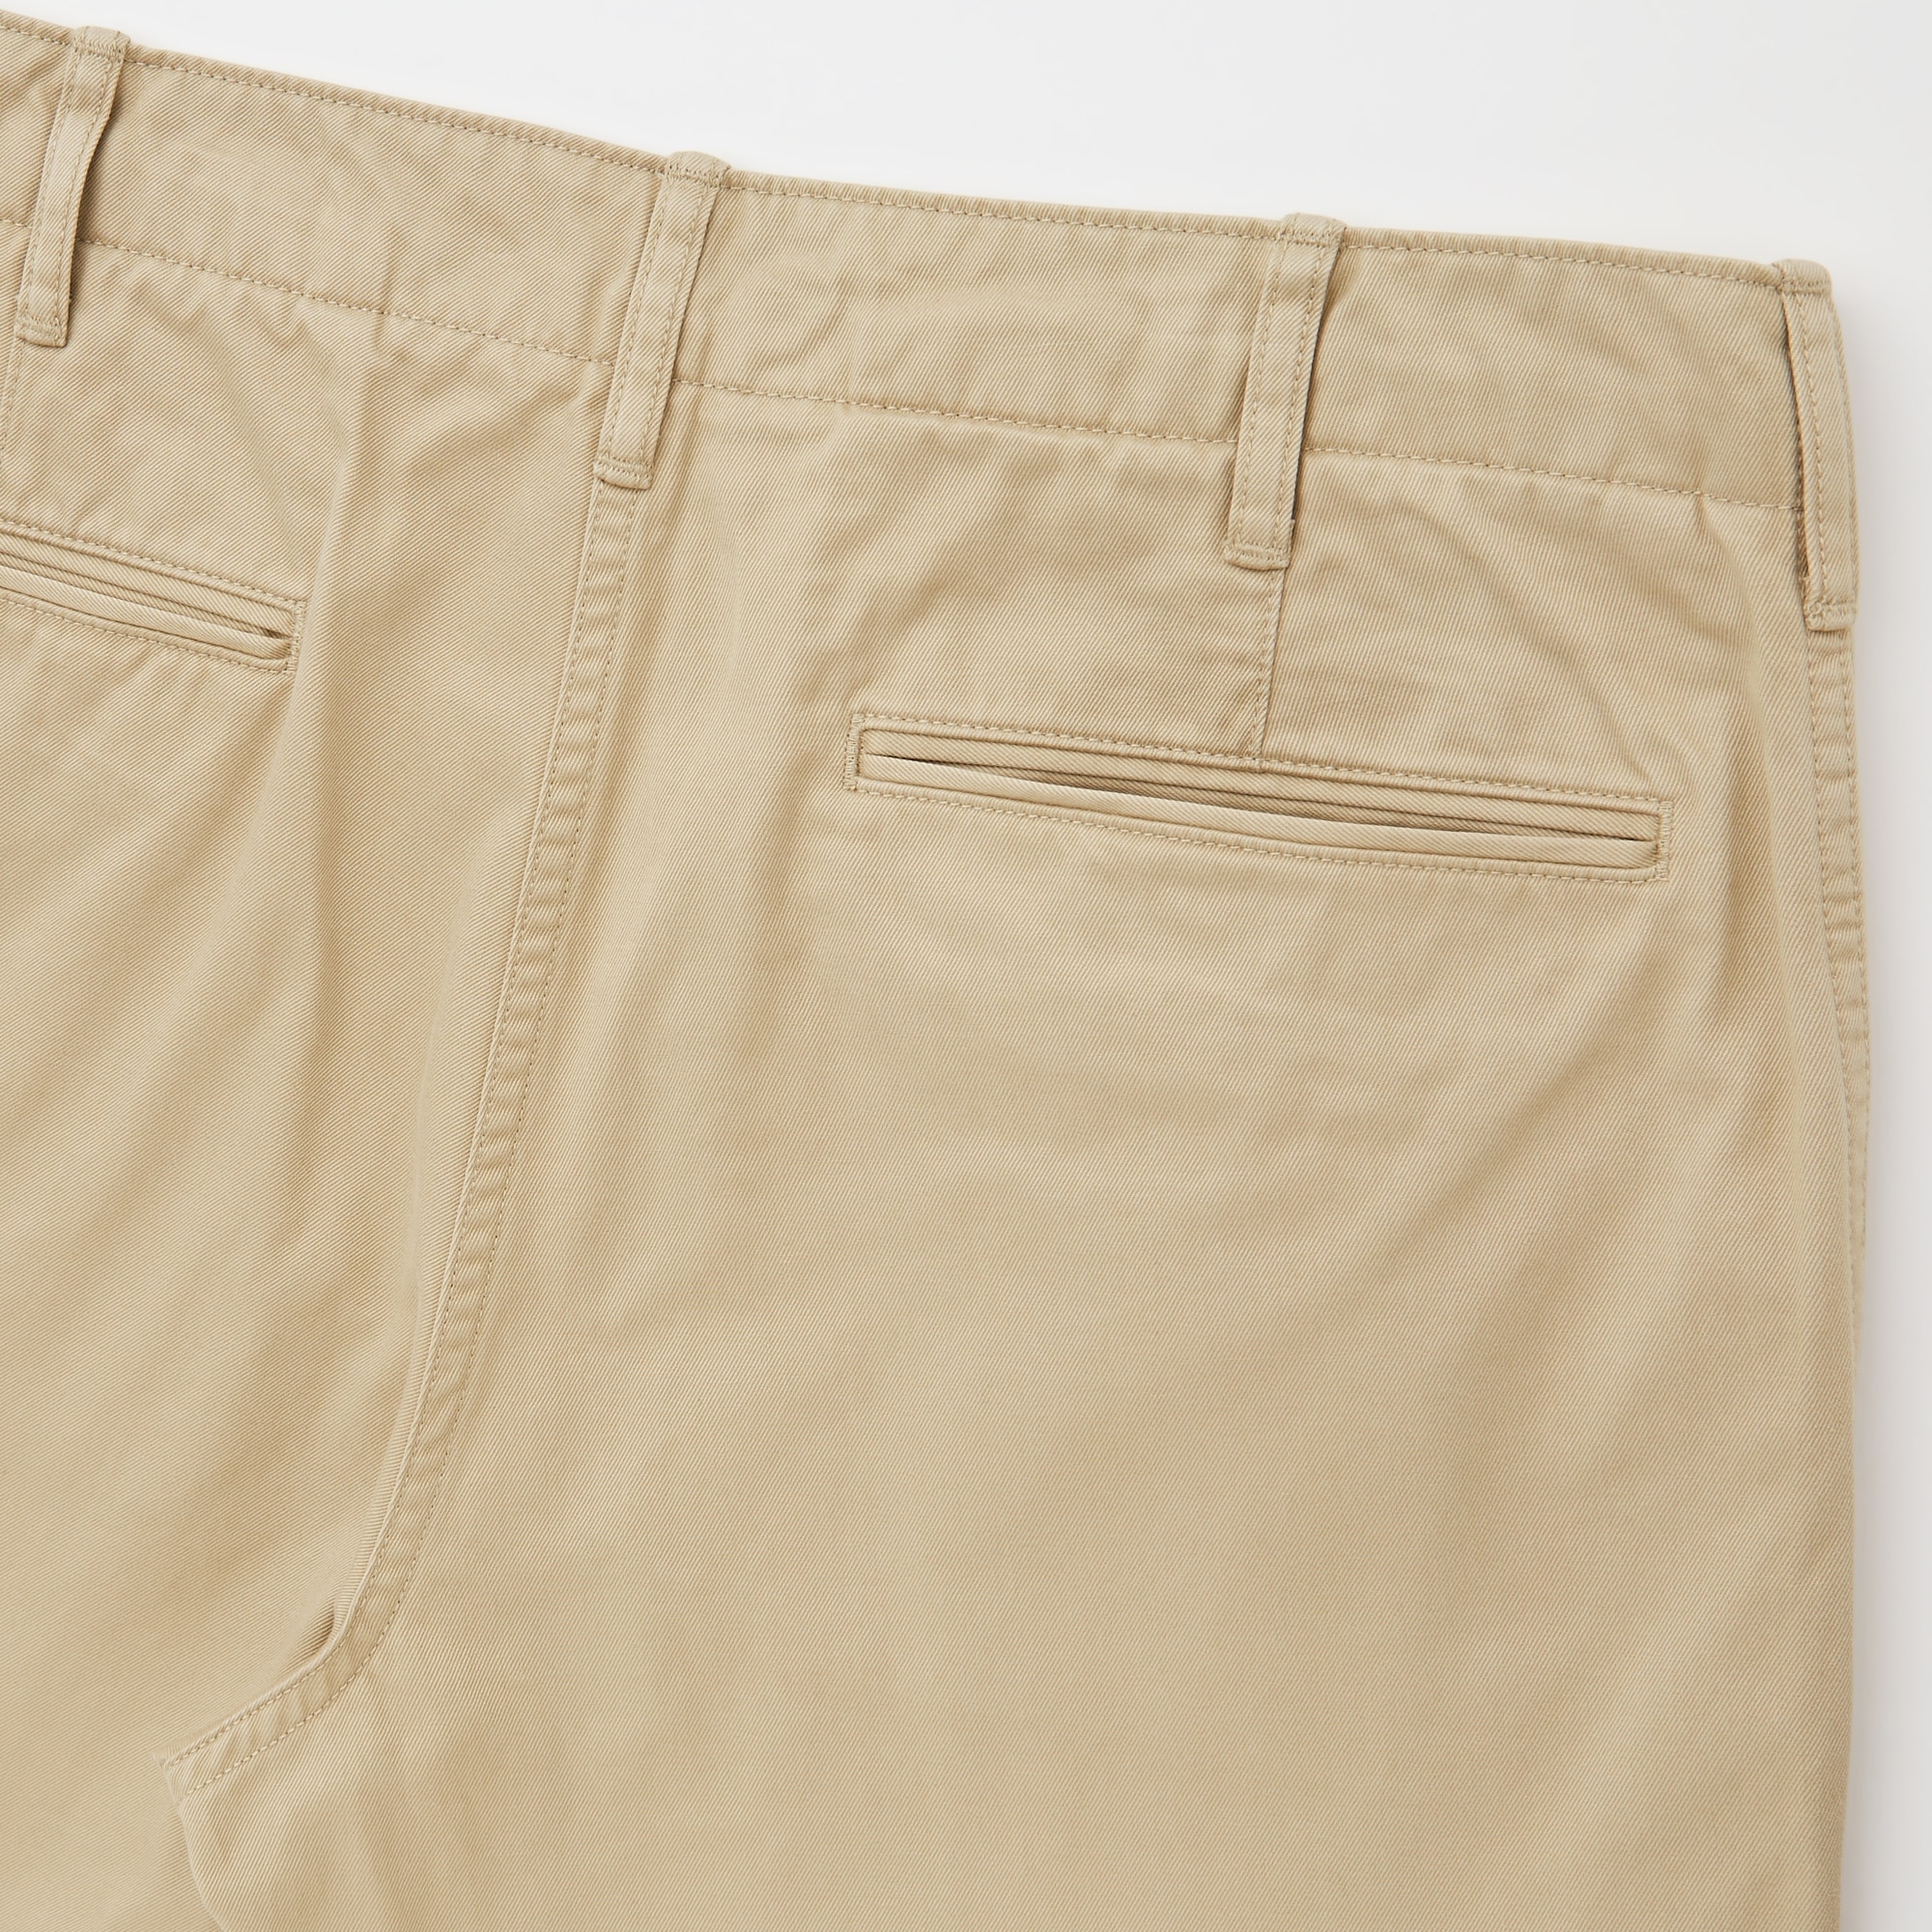 Cotton Vintage Regular Fit Chino Trousers | UNIQLO UK